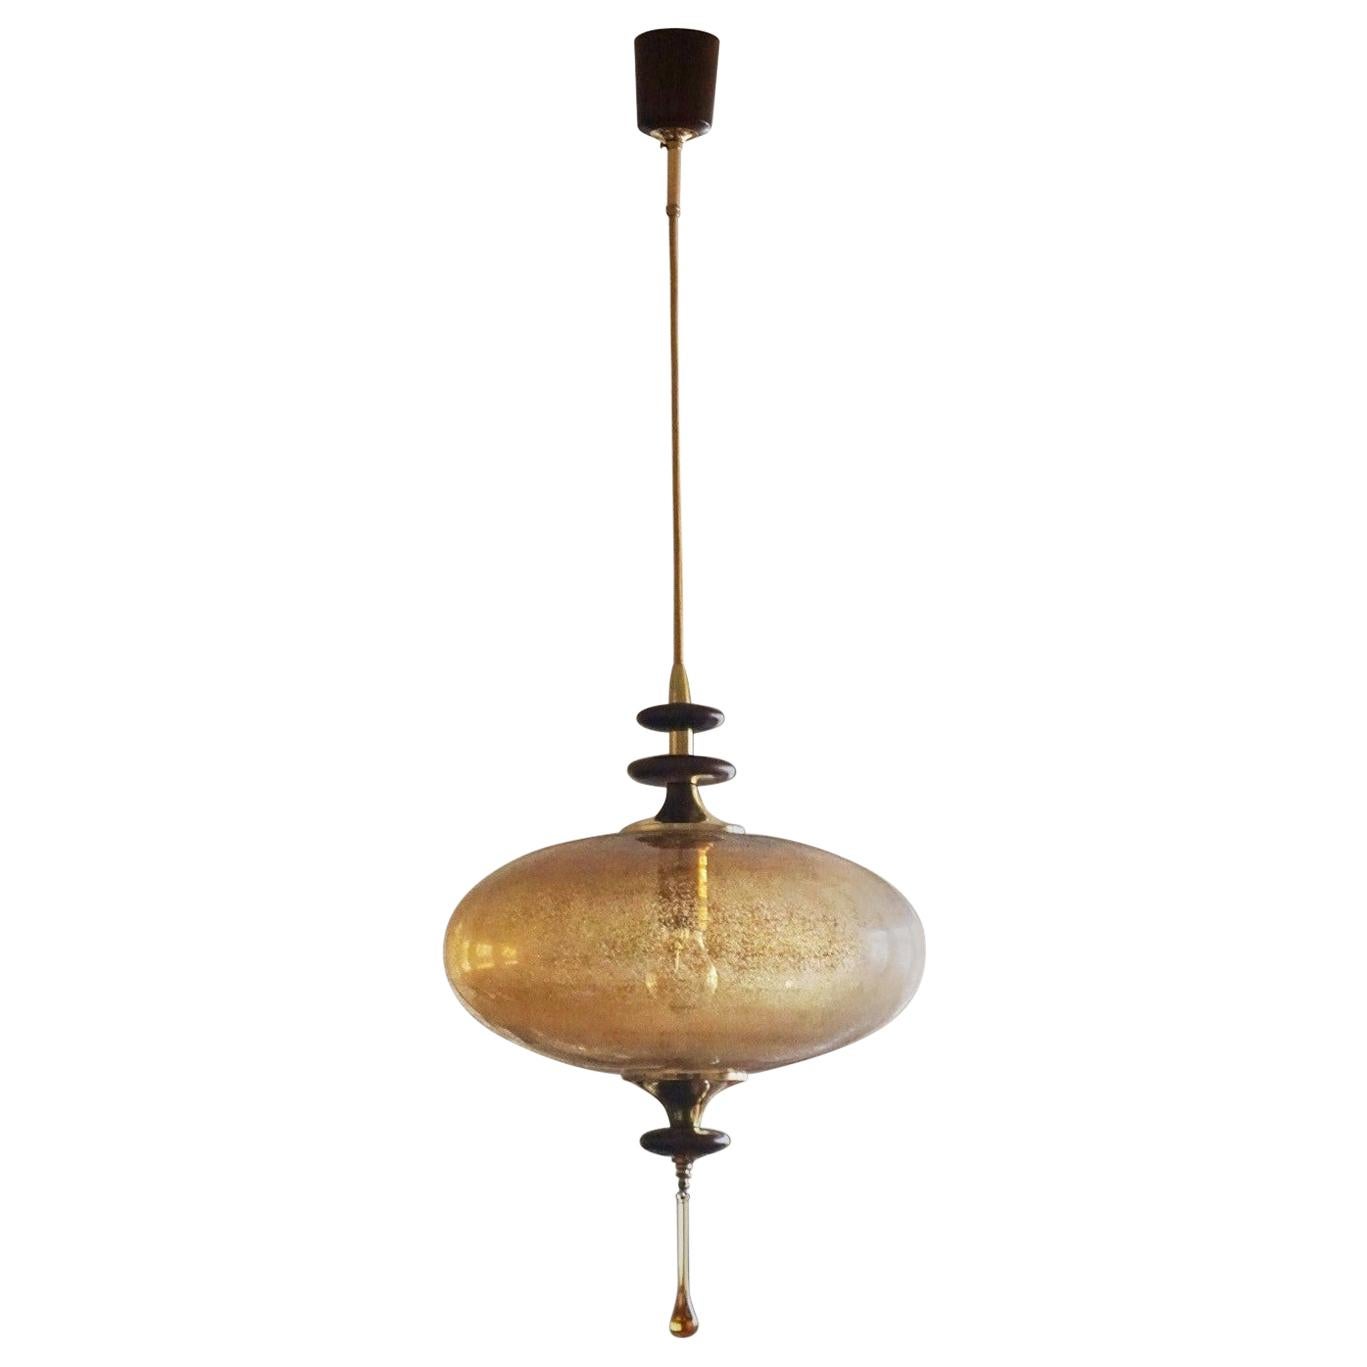 A large Stilnovo style Murano glass UFO pendant, 1950s Italian design executed in rosewood and brass, with original rosewood cylindrical canopy.
Professionally rewired with one E27 light socket for large sized bulb up to 100w.
Measures: Height 43